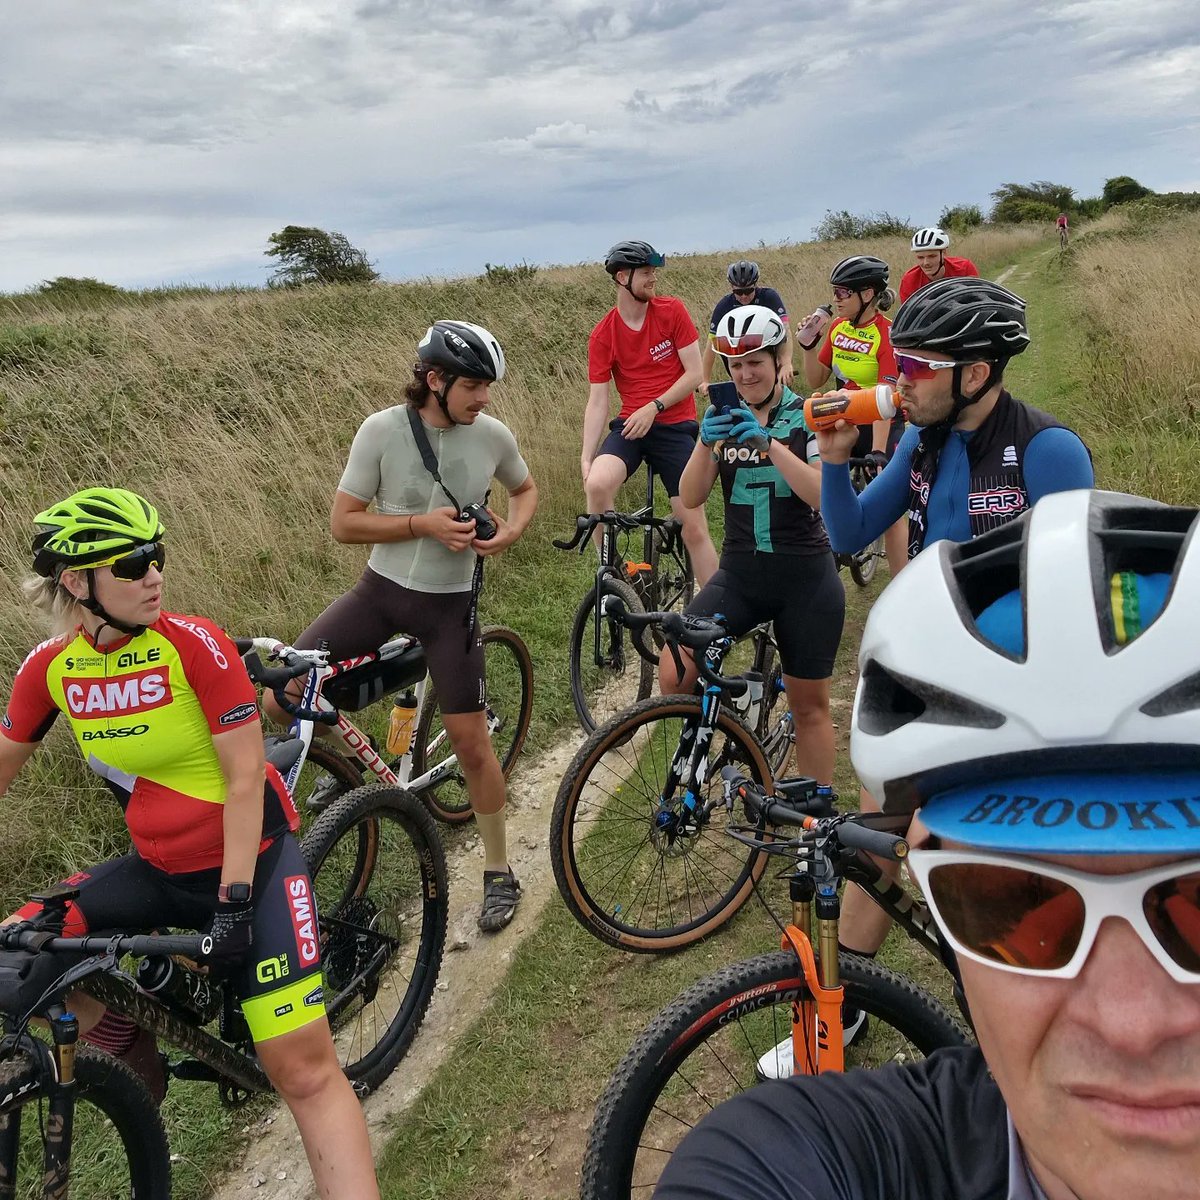 Great company, fab ride with @CAMScycling @JesseYates1996. SDW from @cadence_club Eastbourne to Cadence Litlington and back. Gravel, coffee, networking = good times! 👌

@Ed_Clancy @PursuitLine @IanBibby86 @CAMS_bassobikes @dcrwheels @aeightracer @InGear_RT @quocshoes